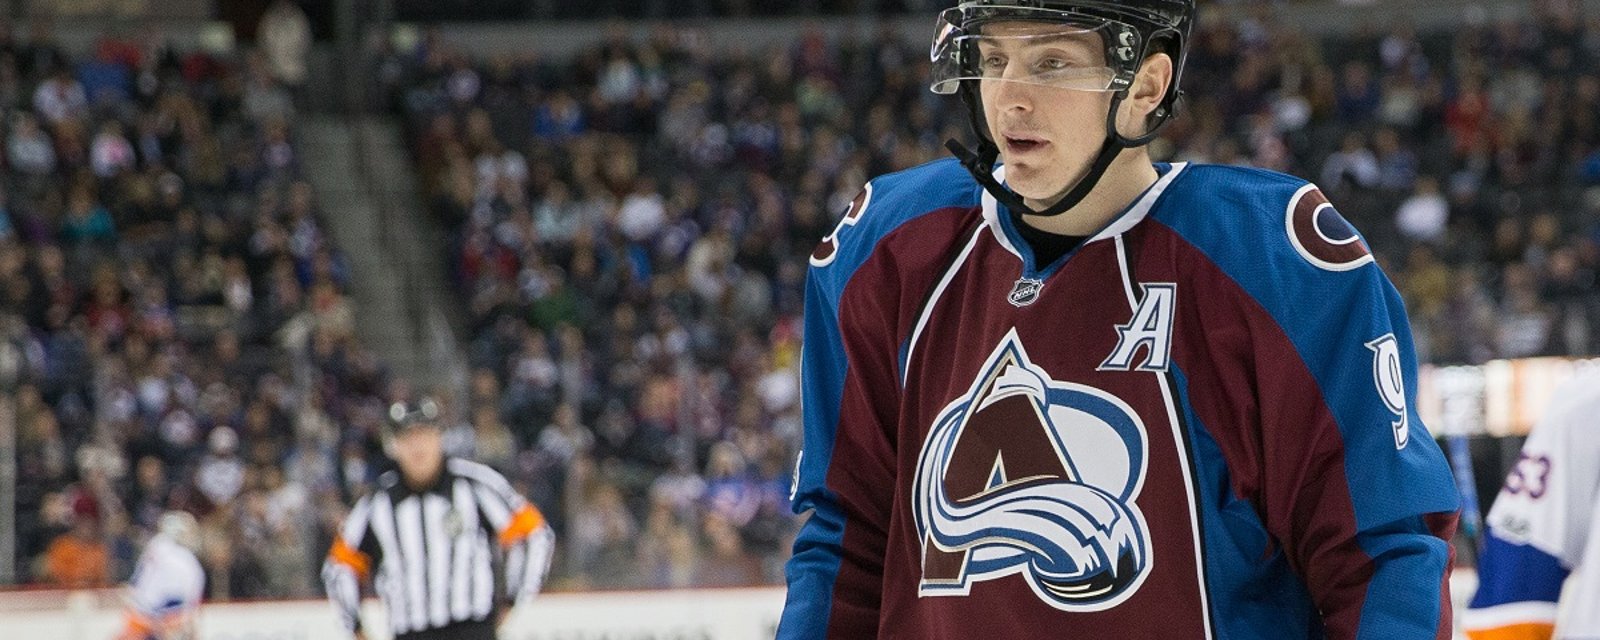 Breaking: NHL team in the mix for Duchene just followed him on social media!